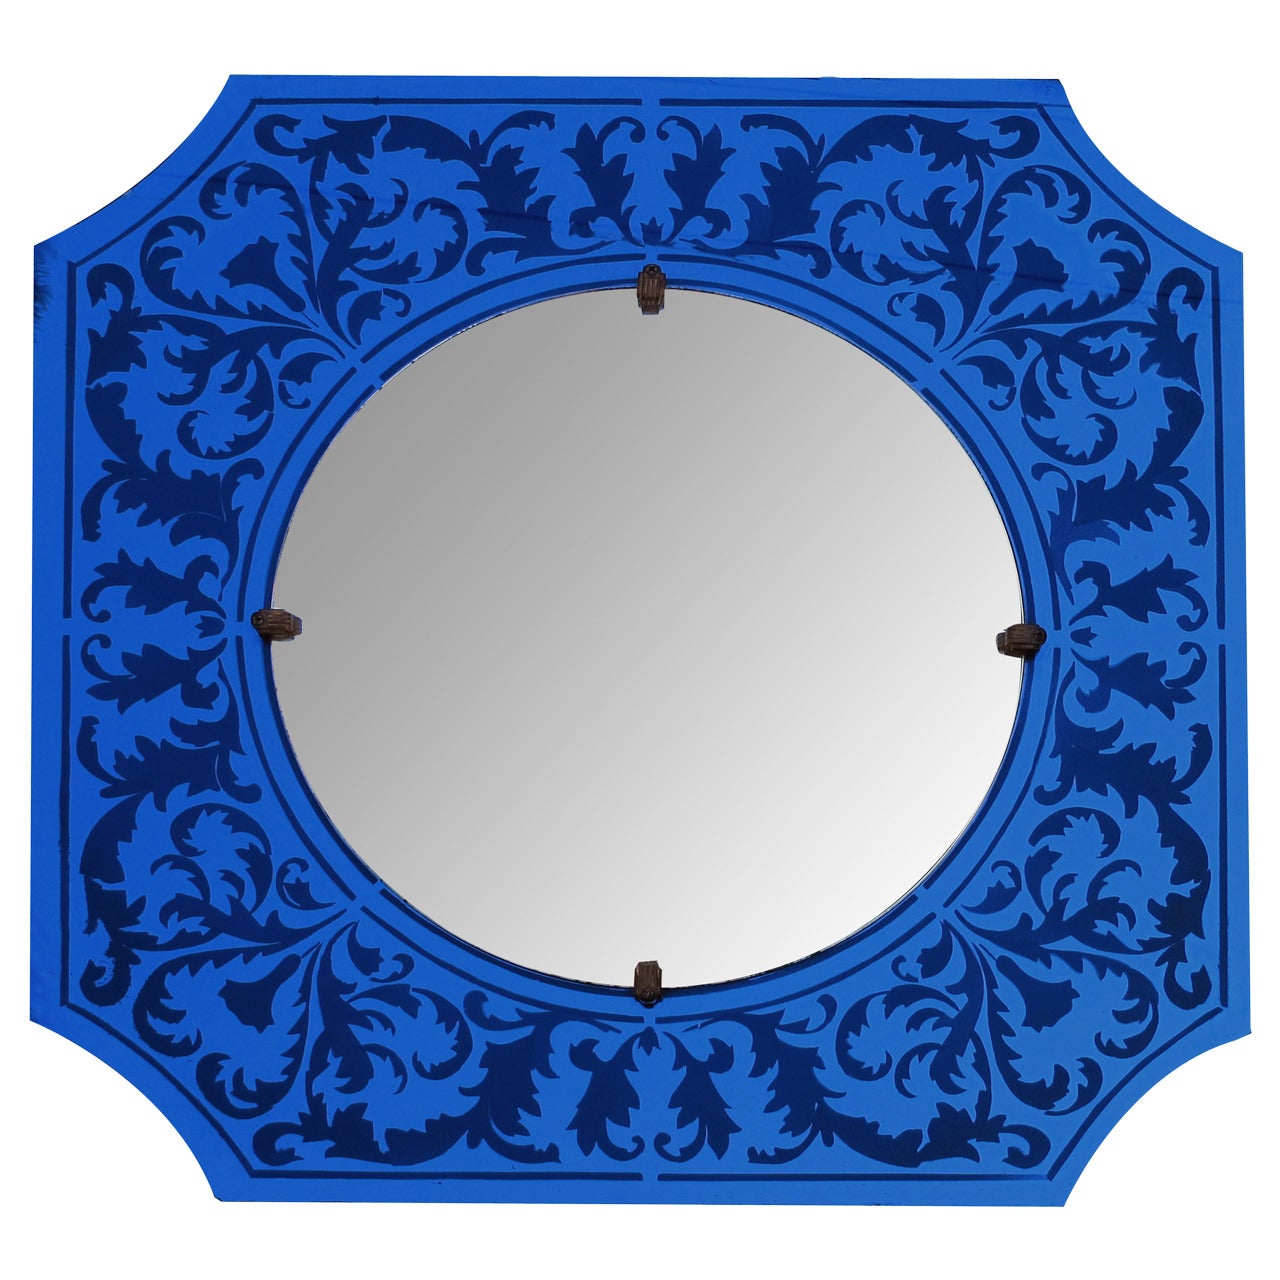 Stylish American Art Deco Bull's Eye Mirror with Etched Cobalt Blue Frame